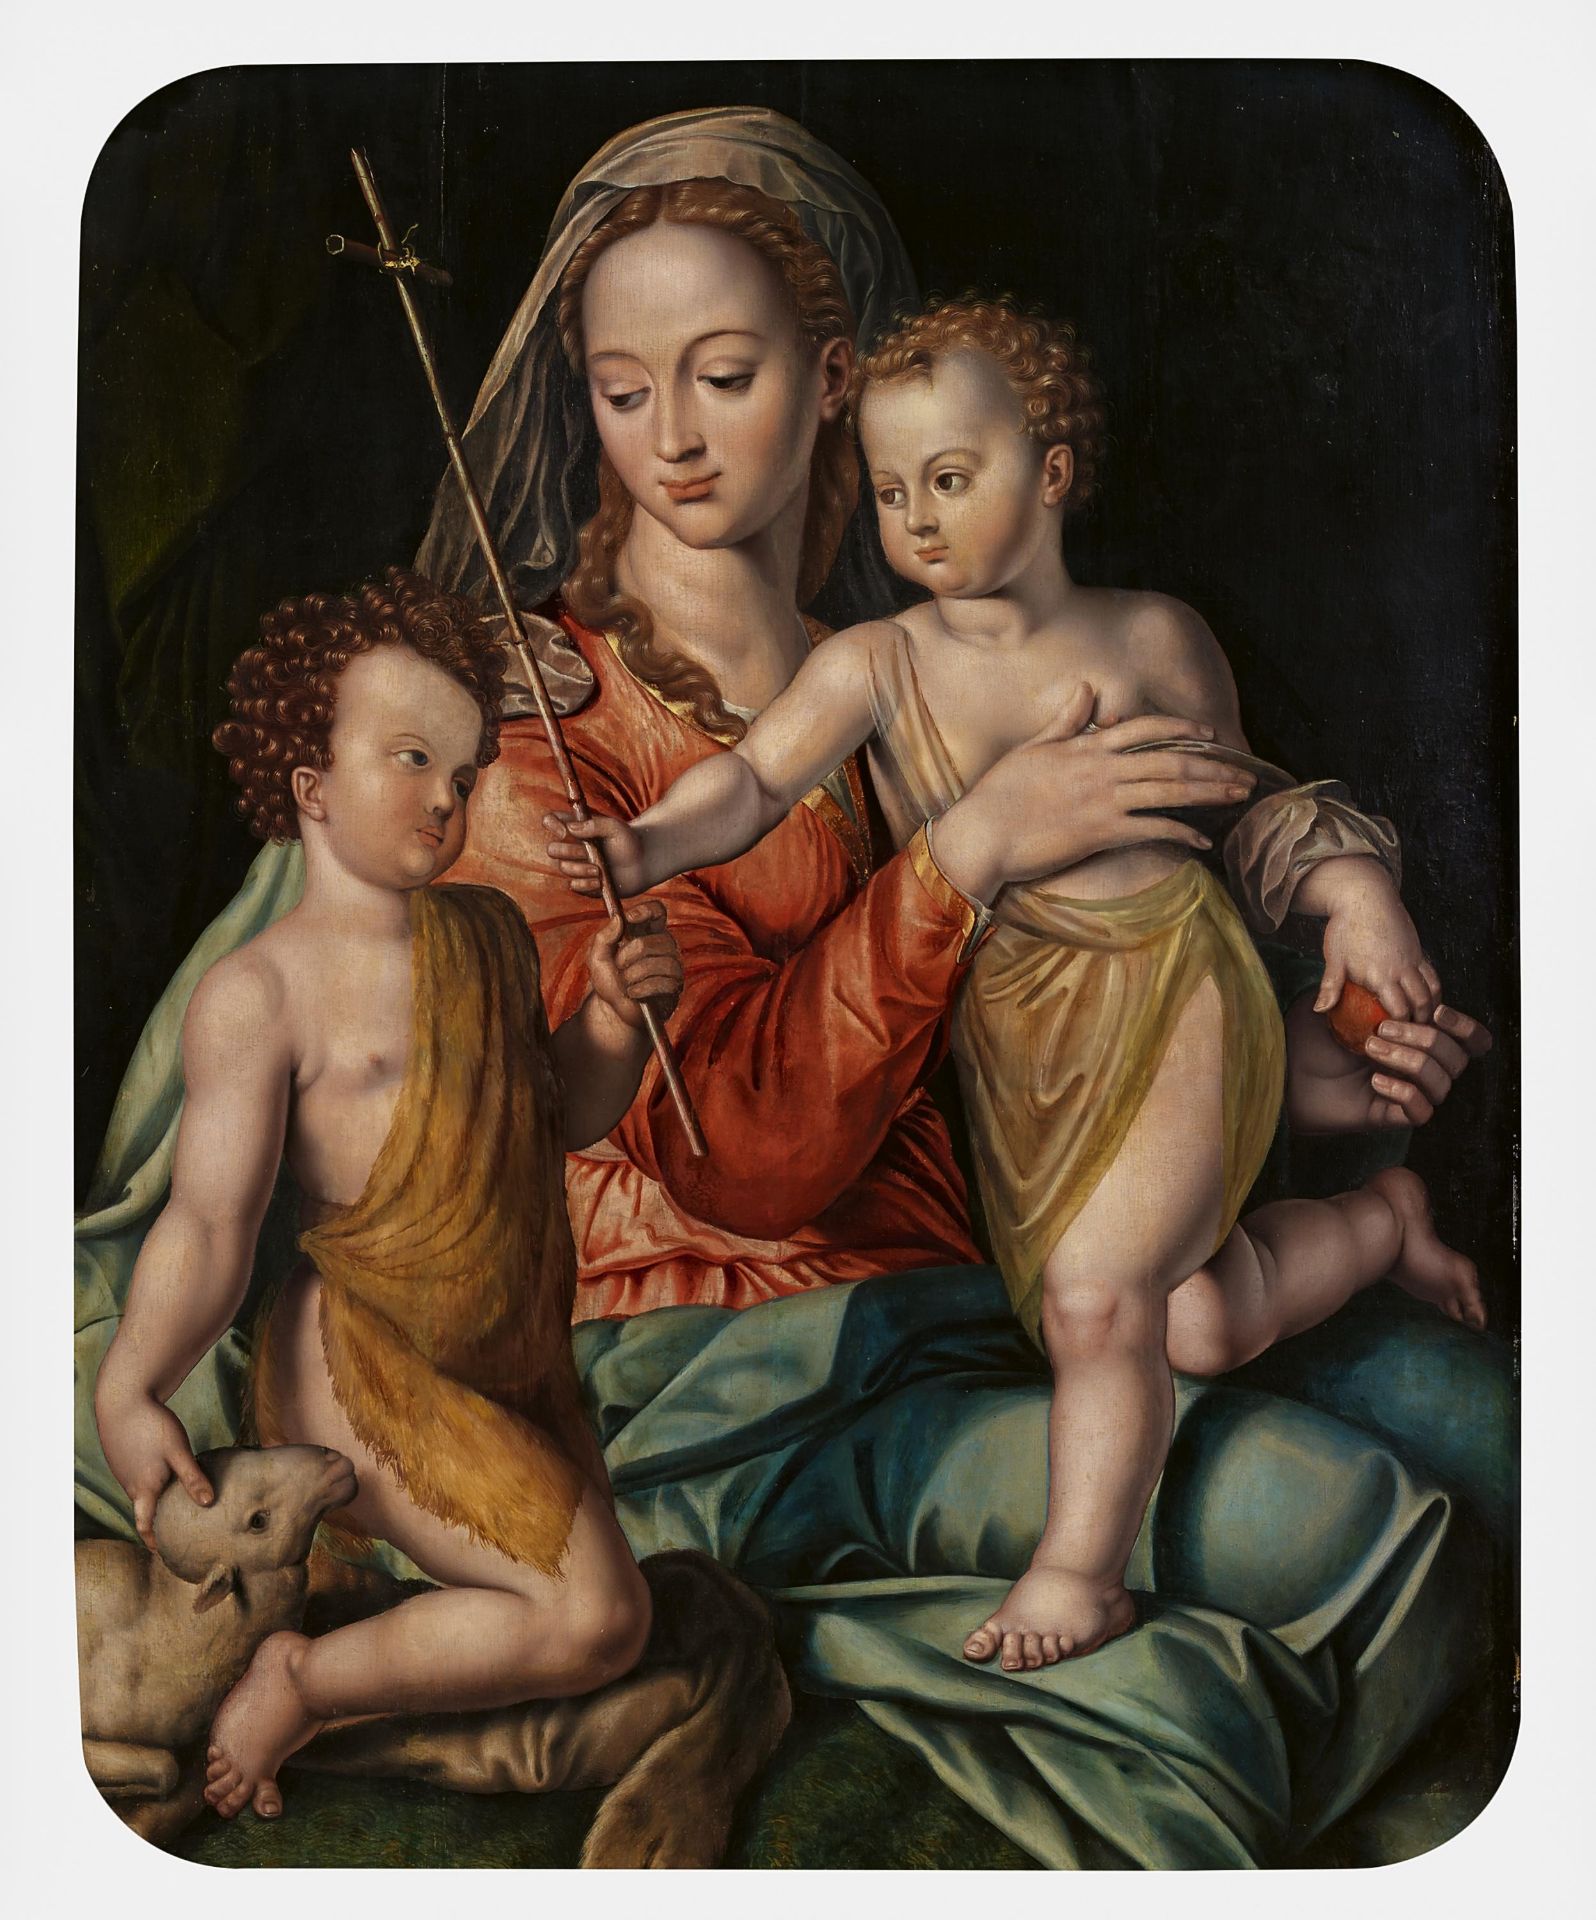 FLEMISH MASTERLate 16th centuryTitle: Madonna and Child with the Infant Saint John the Baptist.